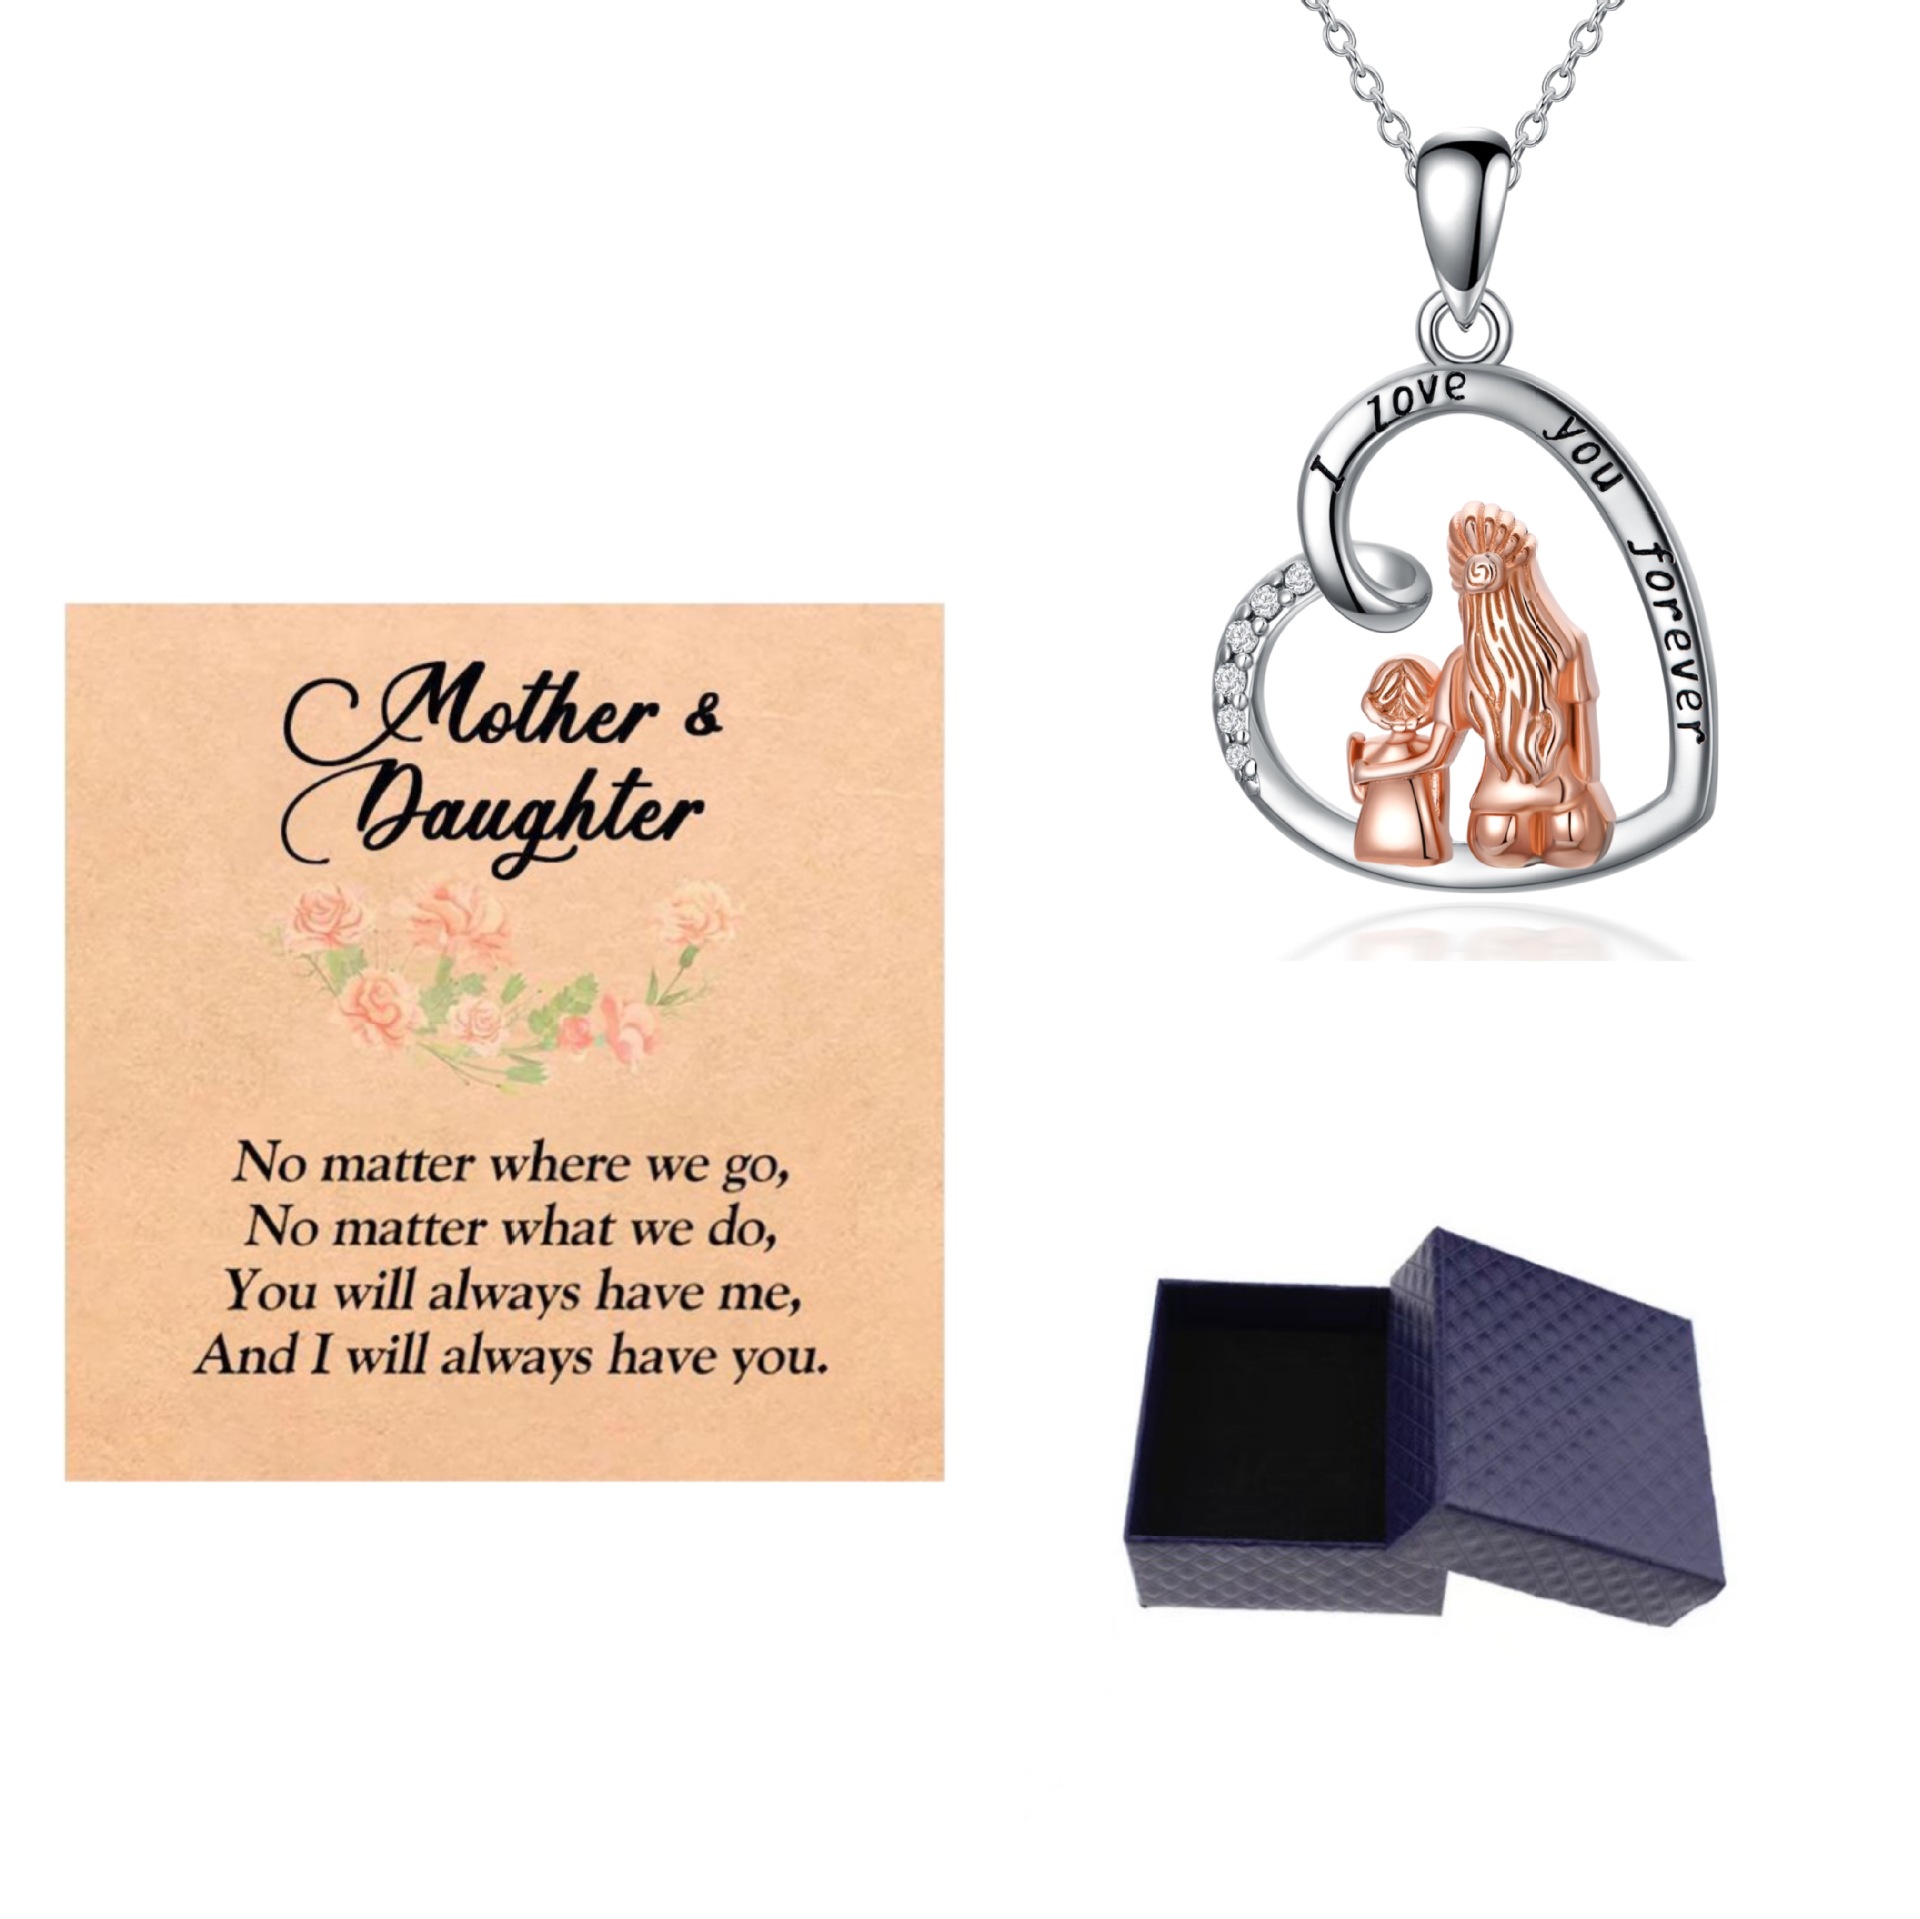 Necklace + mother-daughter card + box